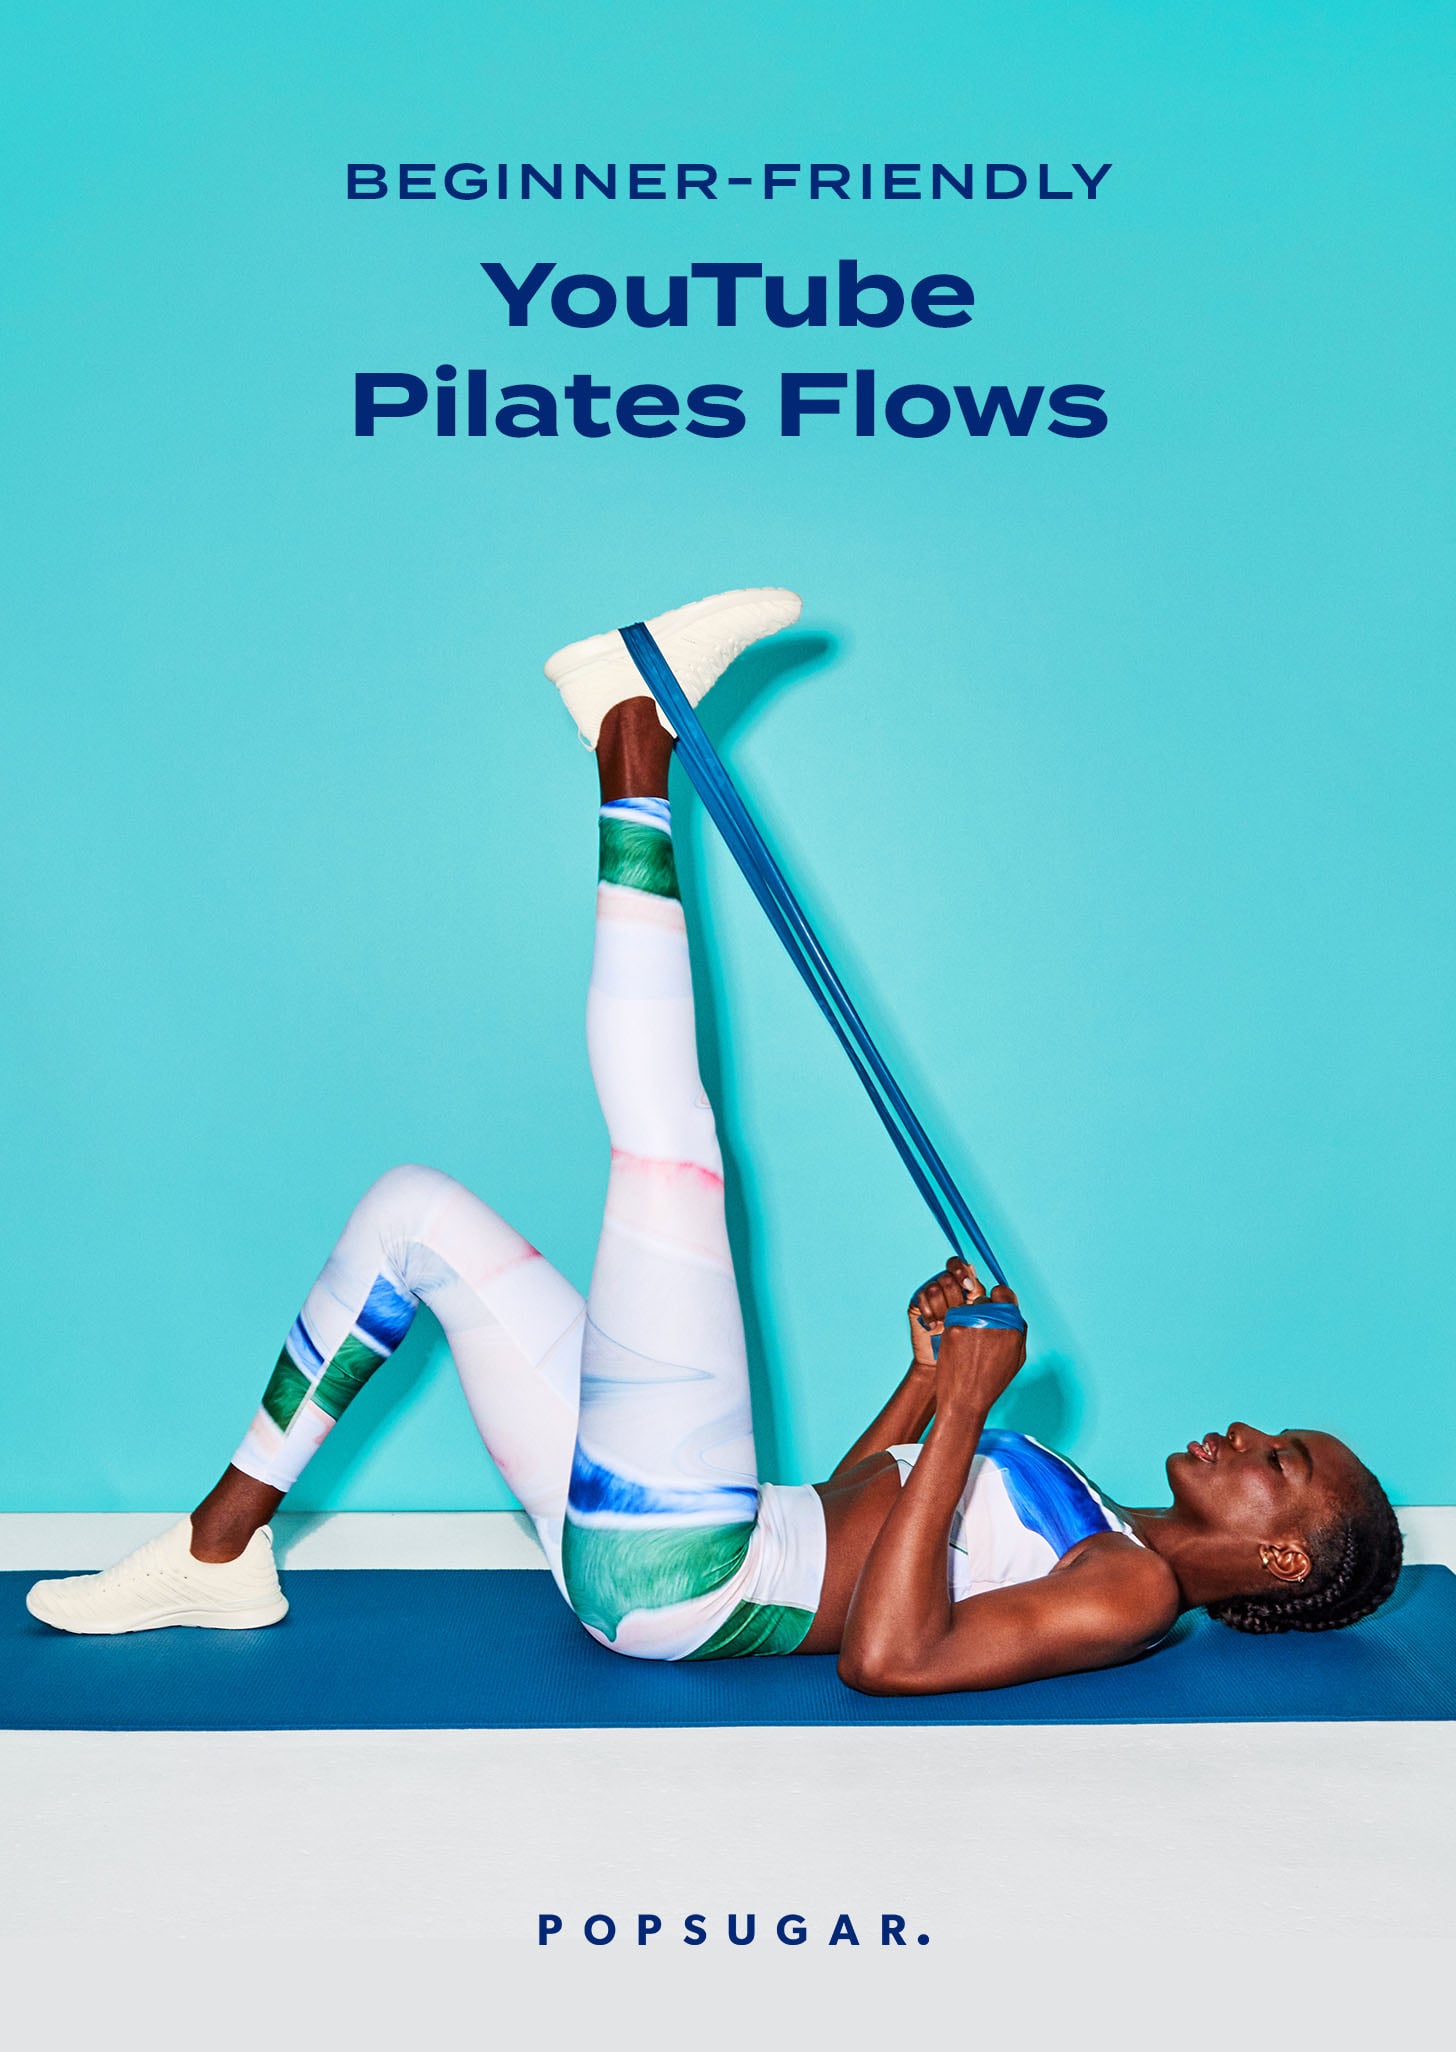 Ankle & Foot Strengthening Exercises - Jessica Valant Pilates